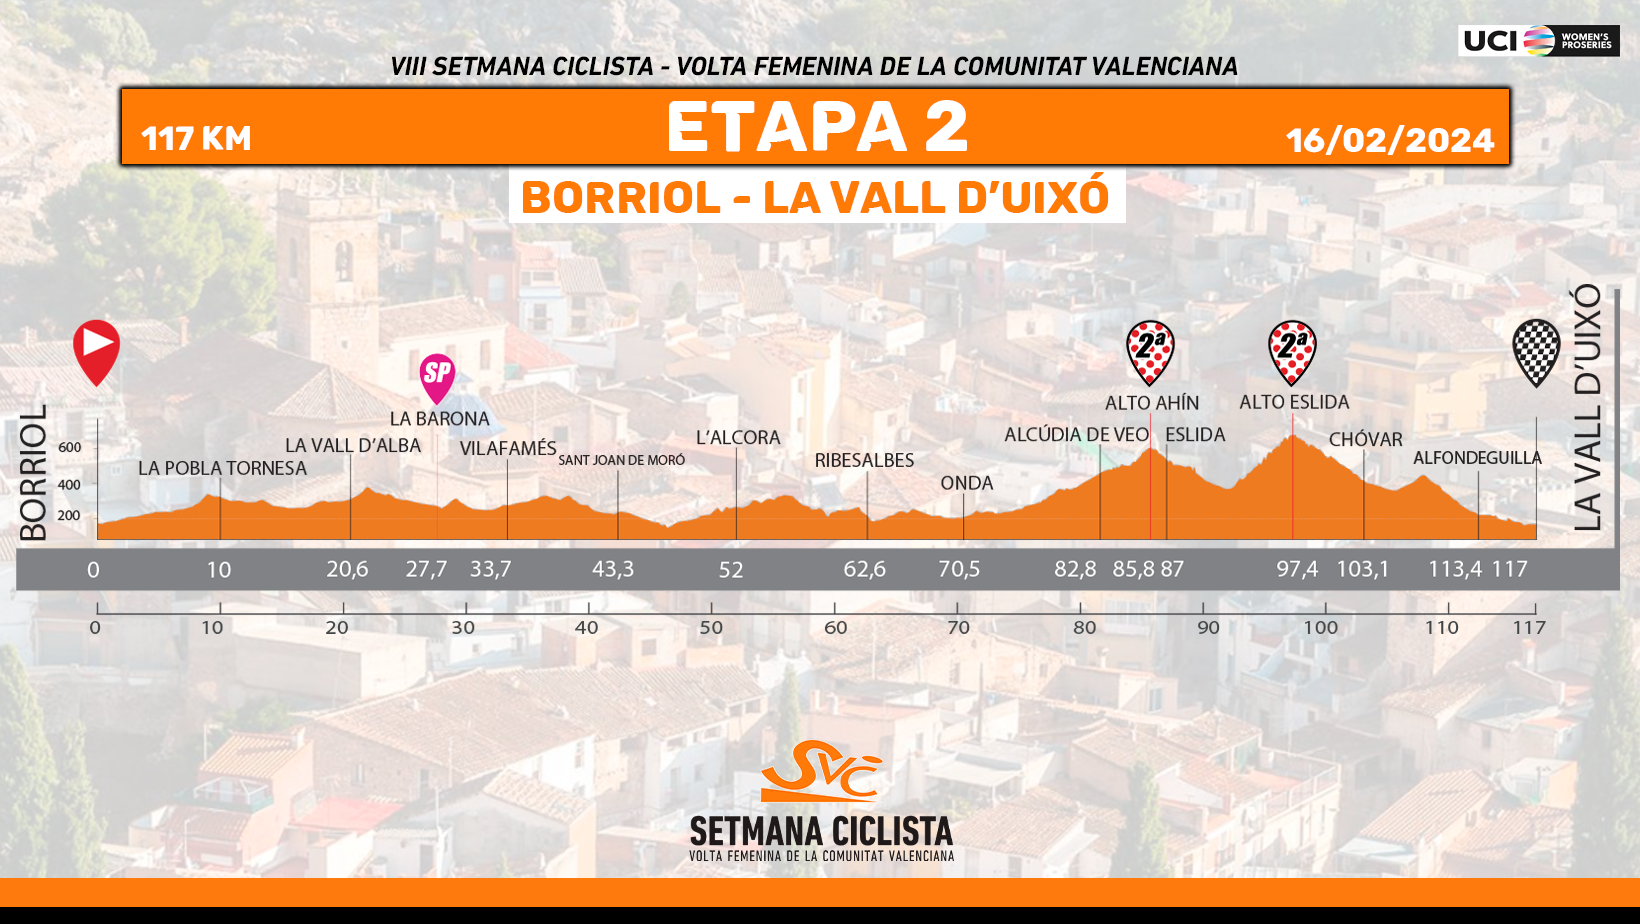 Stage 2 profile of Setmana Ciclista, showing a slightly easier route that still includes two late climbs.